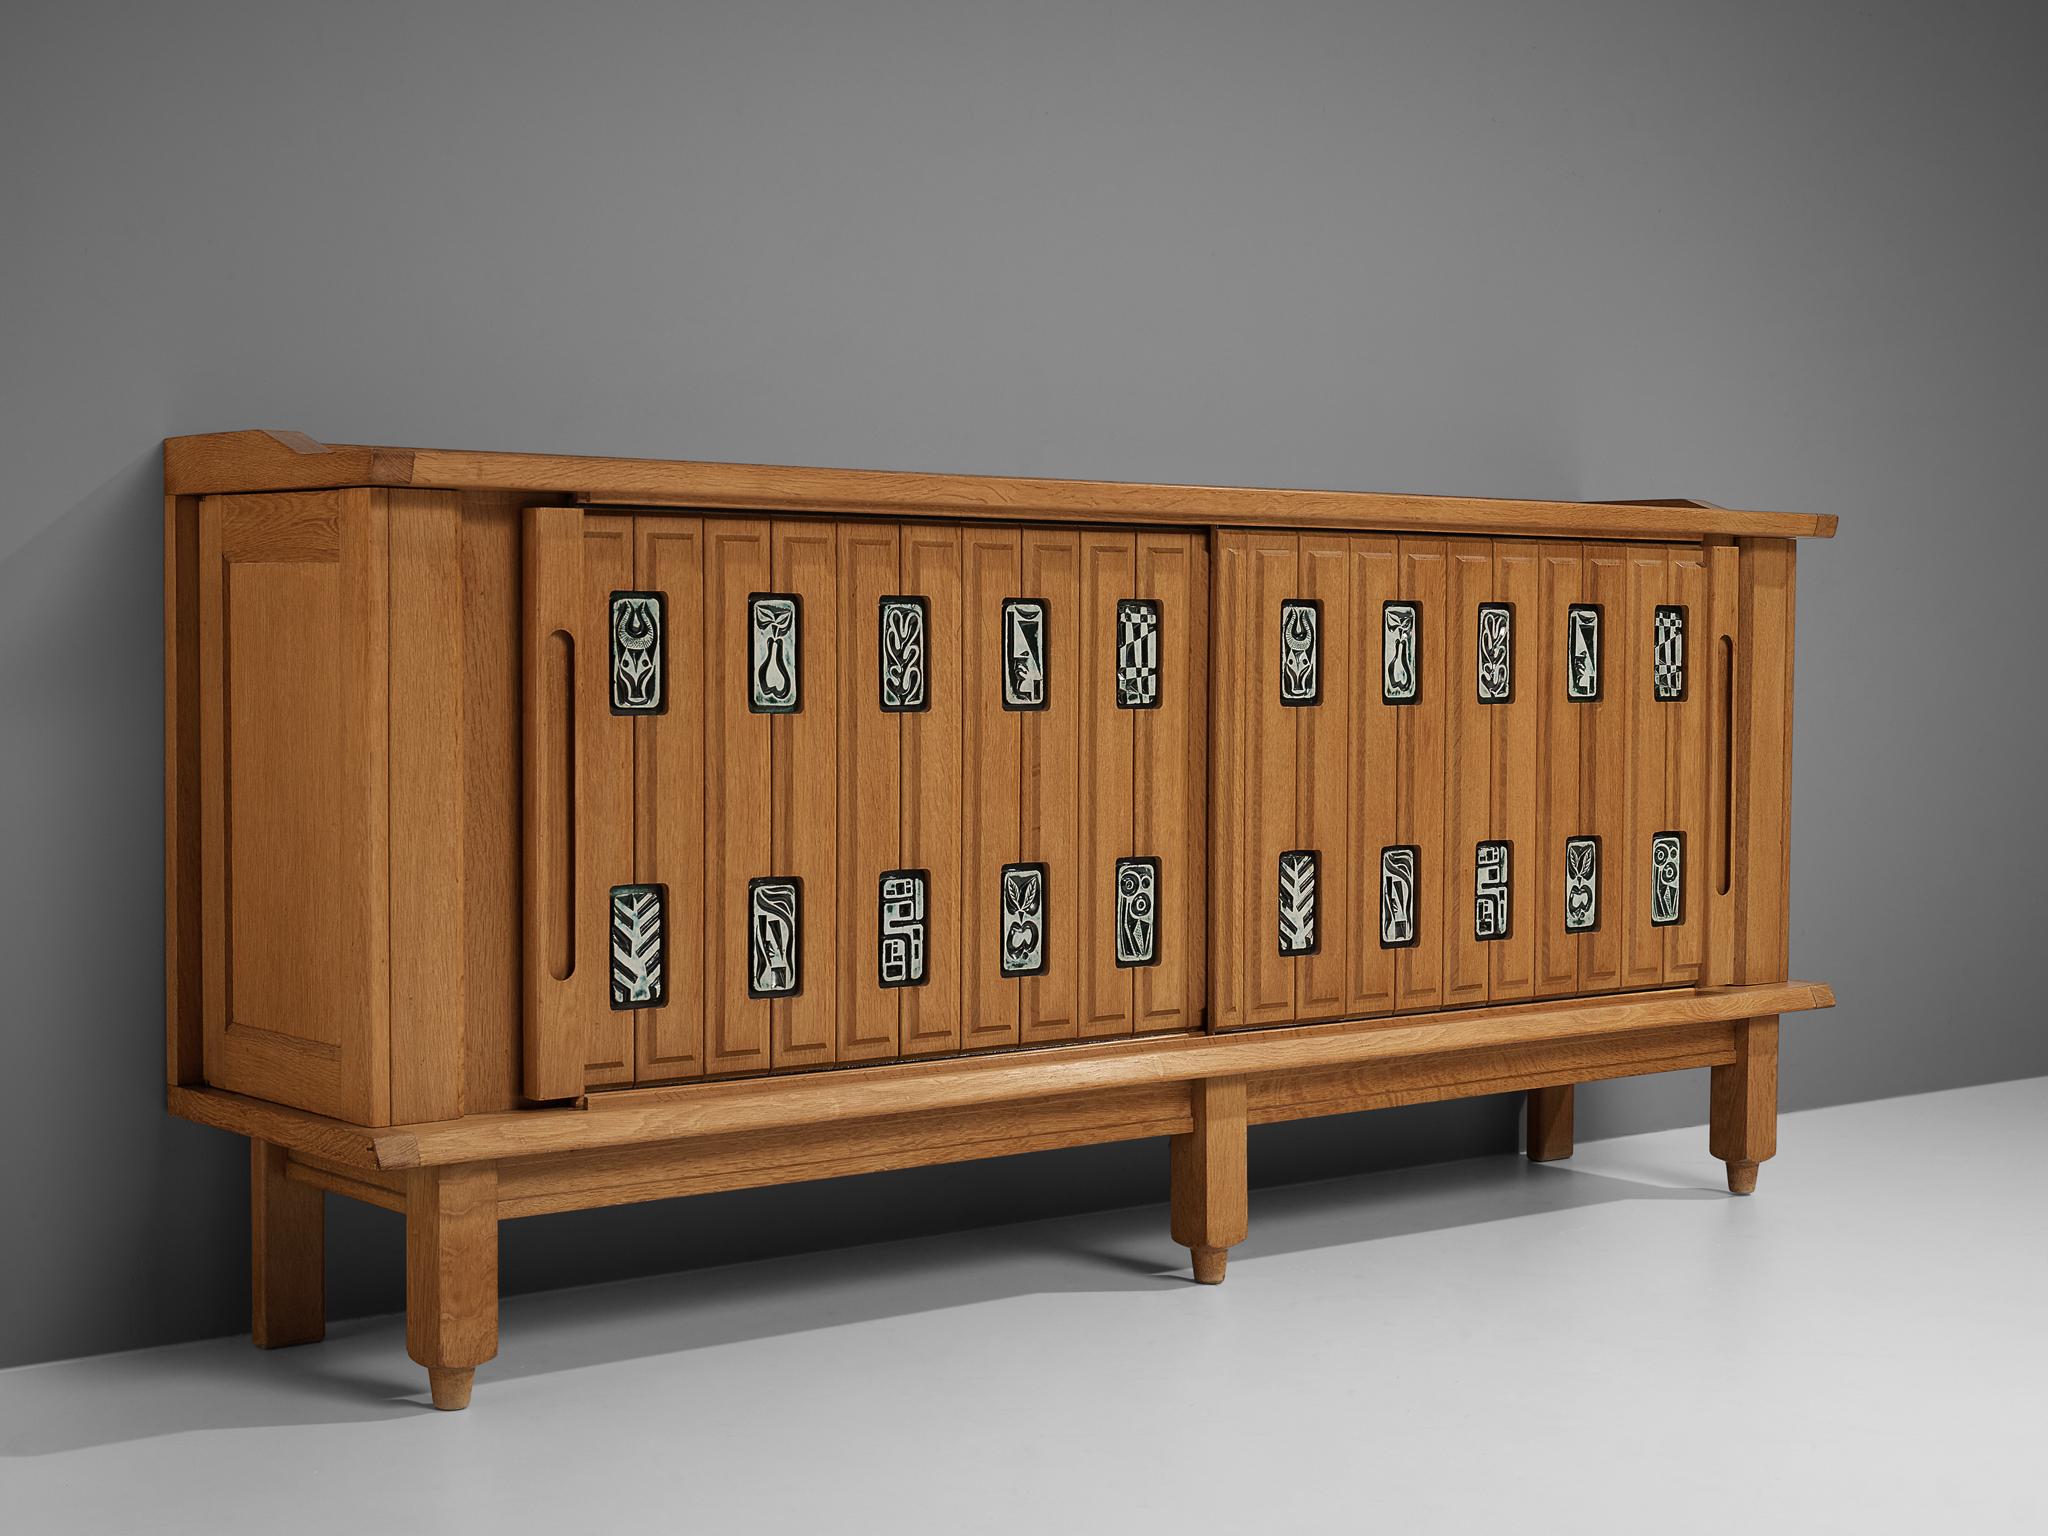 Guillerme et Chambron, sideboard, oak, ceramics, France, 1950s

This sculptural cabinet is executed in oak with ceramic detailing. The sideboard features two sliding front doors as well as two pullout / pull-out doors on the sides that provide